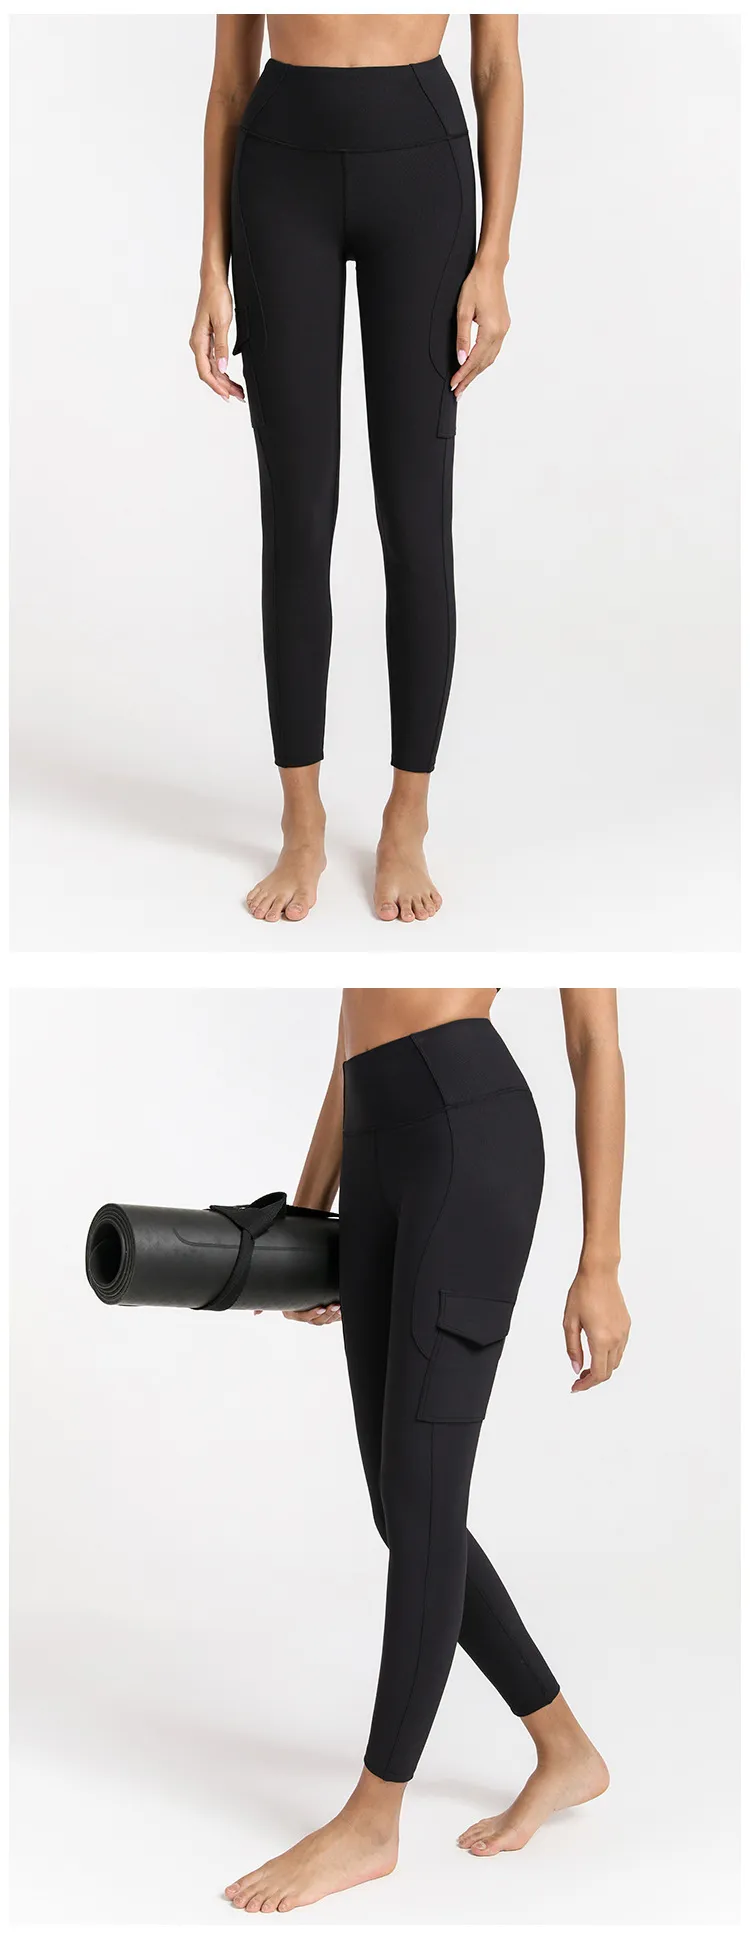 Womens Yoga Leggings With Air Pocket And Pockets Elastic Tight Sports Direct  Yoga Pants For Work, Gym, Running, And Fitness From Luyogaworld, $15.17